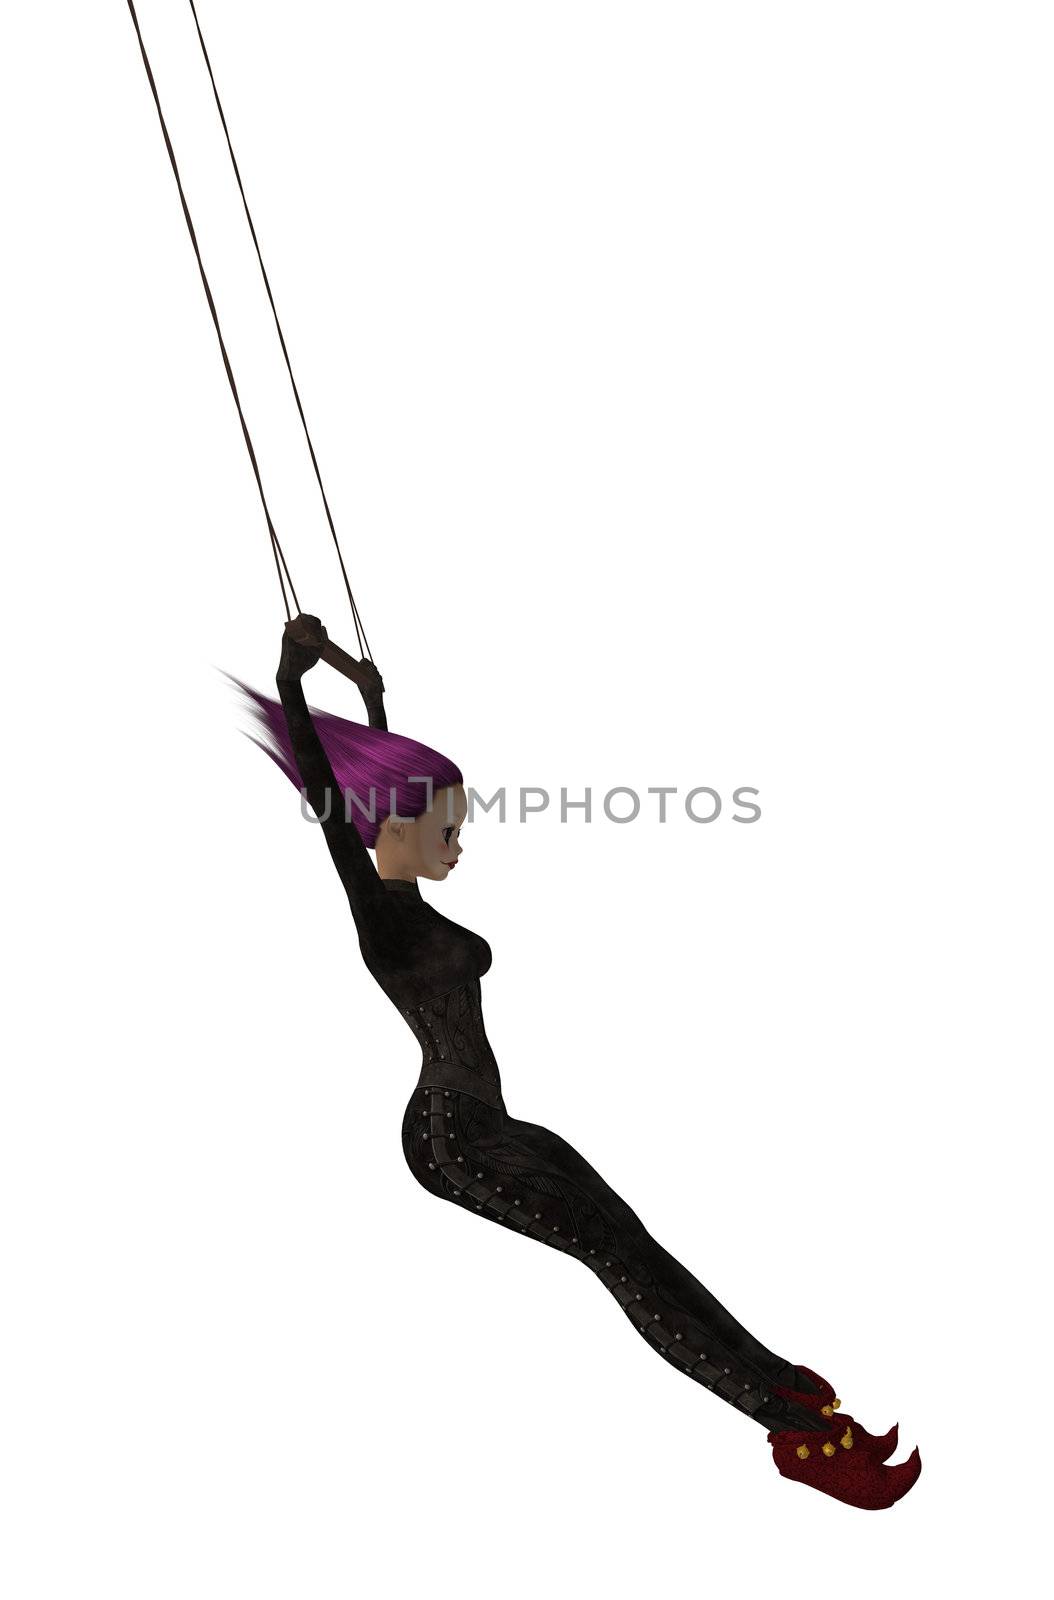 Clown handing on a trapeze on a white background